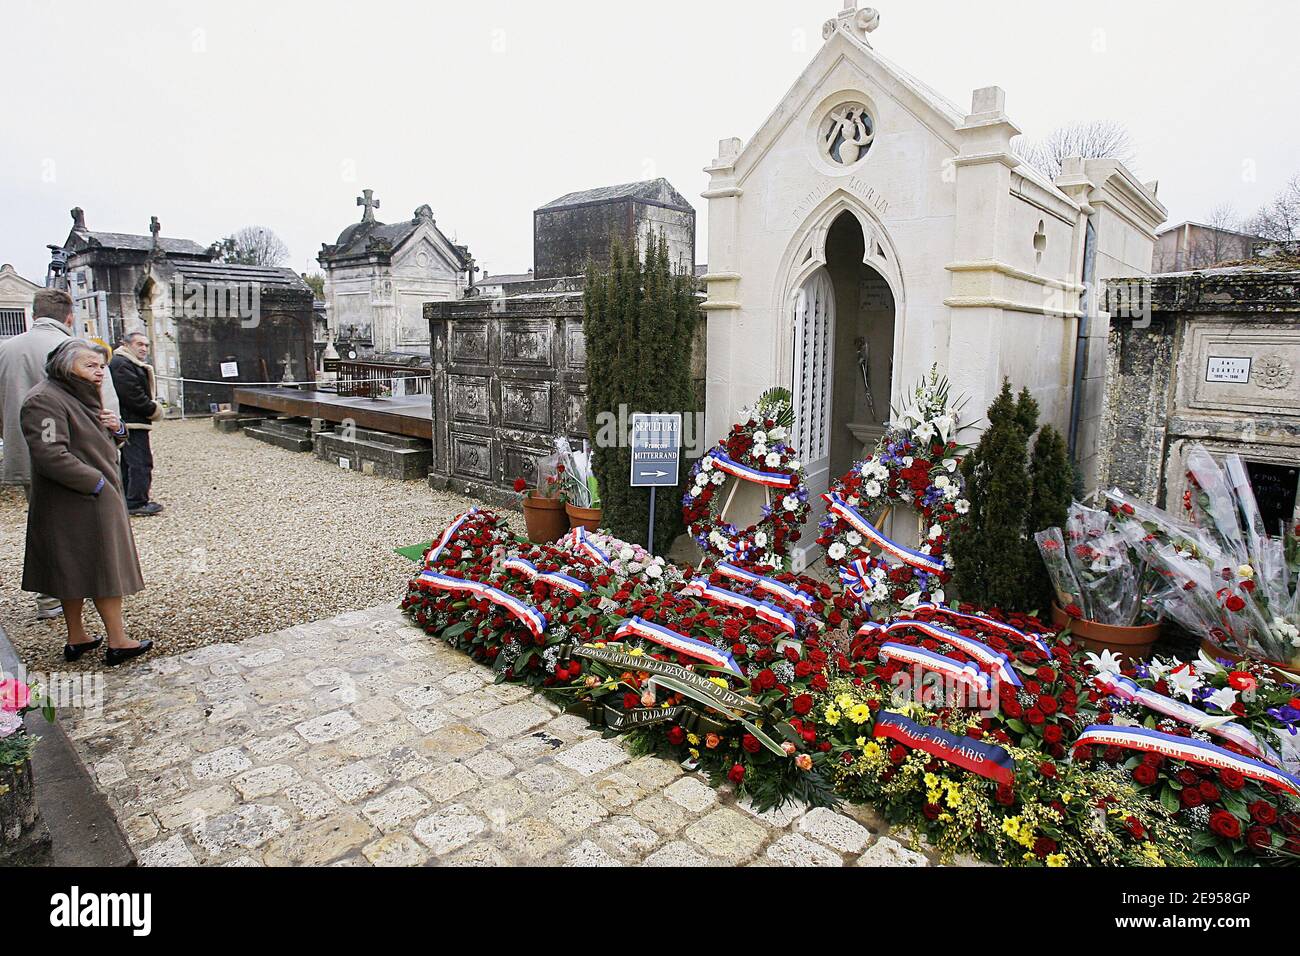 A view of the family grave during the ceremony to honor the memory former French President Francois Mitterrand on January 8, 2006, for the tenth anniversary of his death. The ceremony is held in Mitterrand's home city of Jarnac where he is buried in his family's grave. Mitterrand's home, now a museum open to the public, is officially inaugurate on this day. Photo by Bernard-Mousse/ABACAPRESS.COM Stock Photo